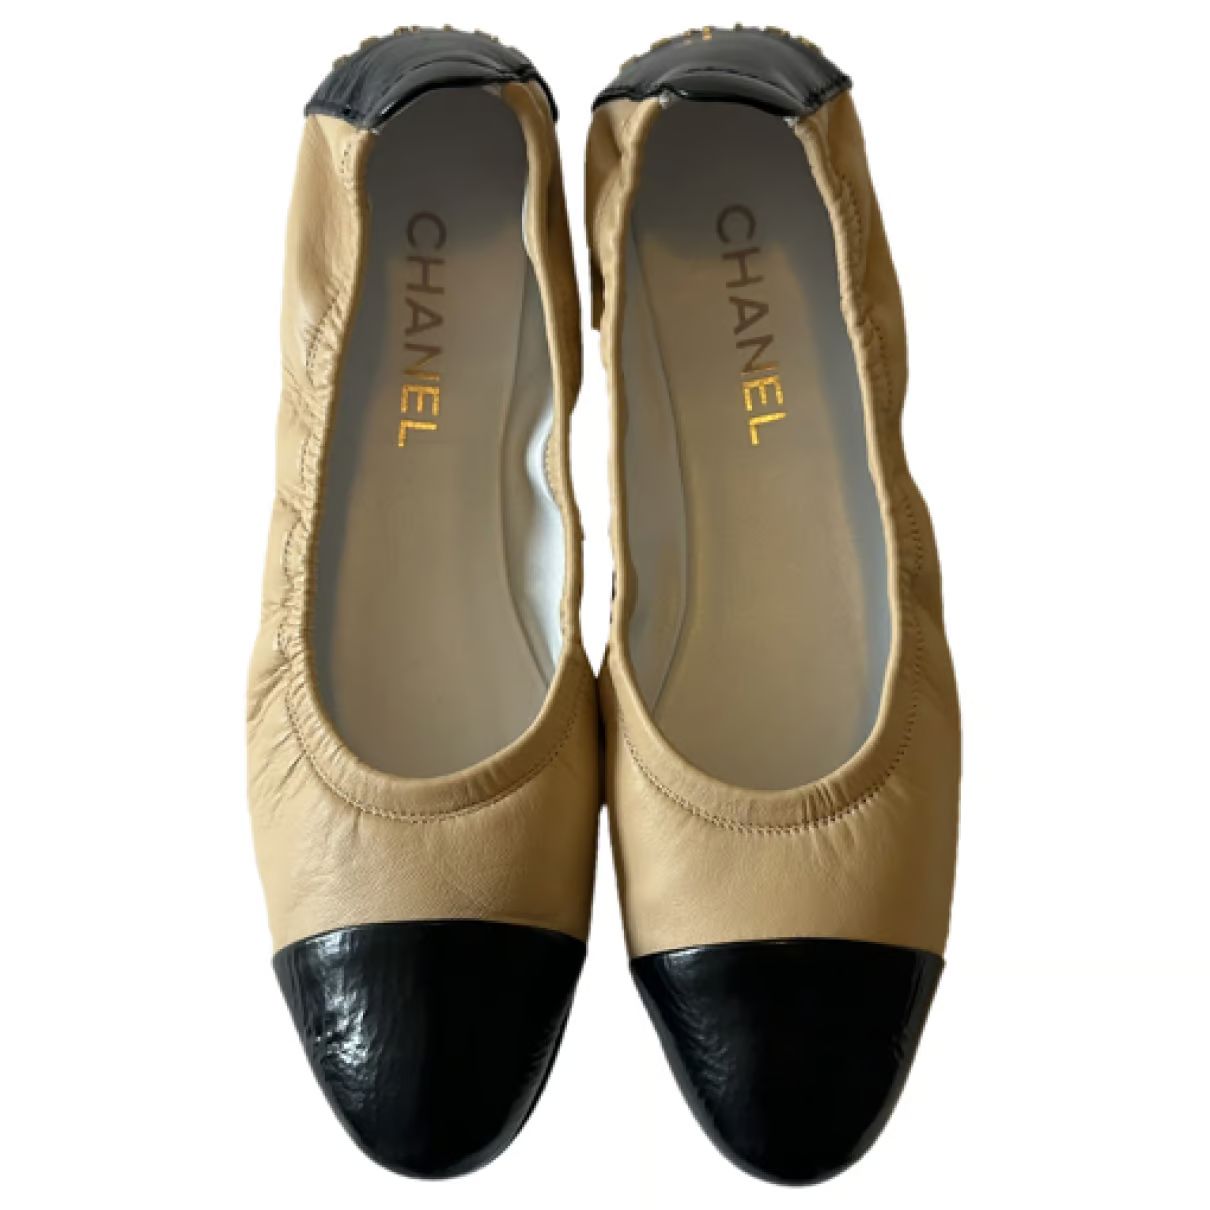 Chanel Women's Ballet flats | Buy or Sell Designer shoes - Vestiaire Collective | Vestiaire Collective (Global)